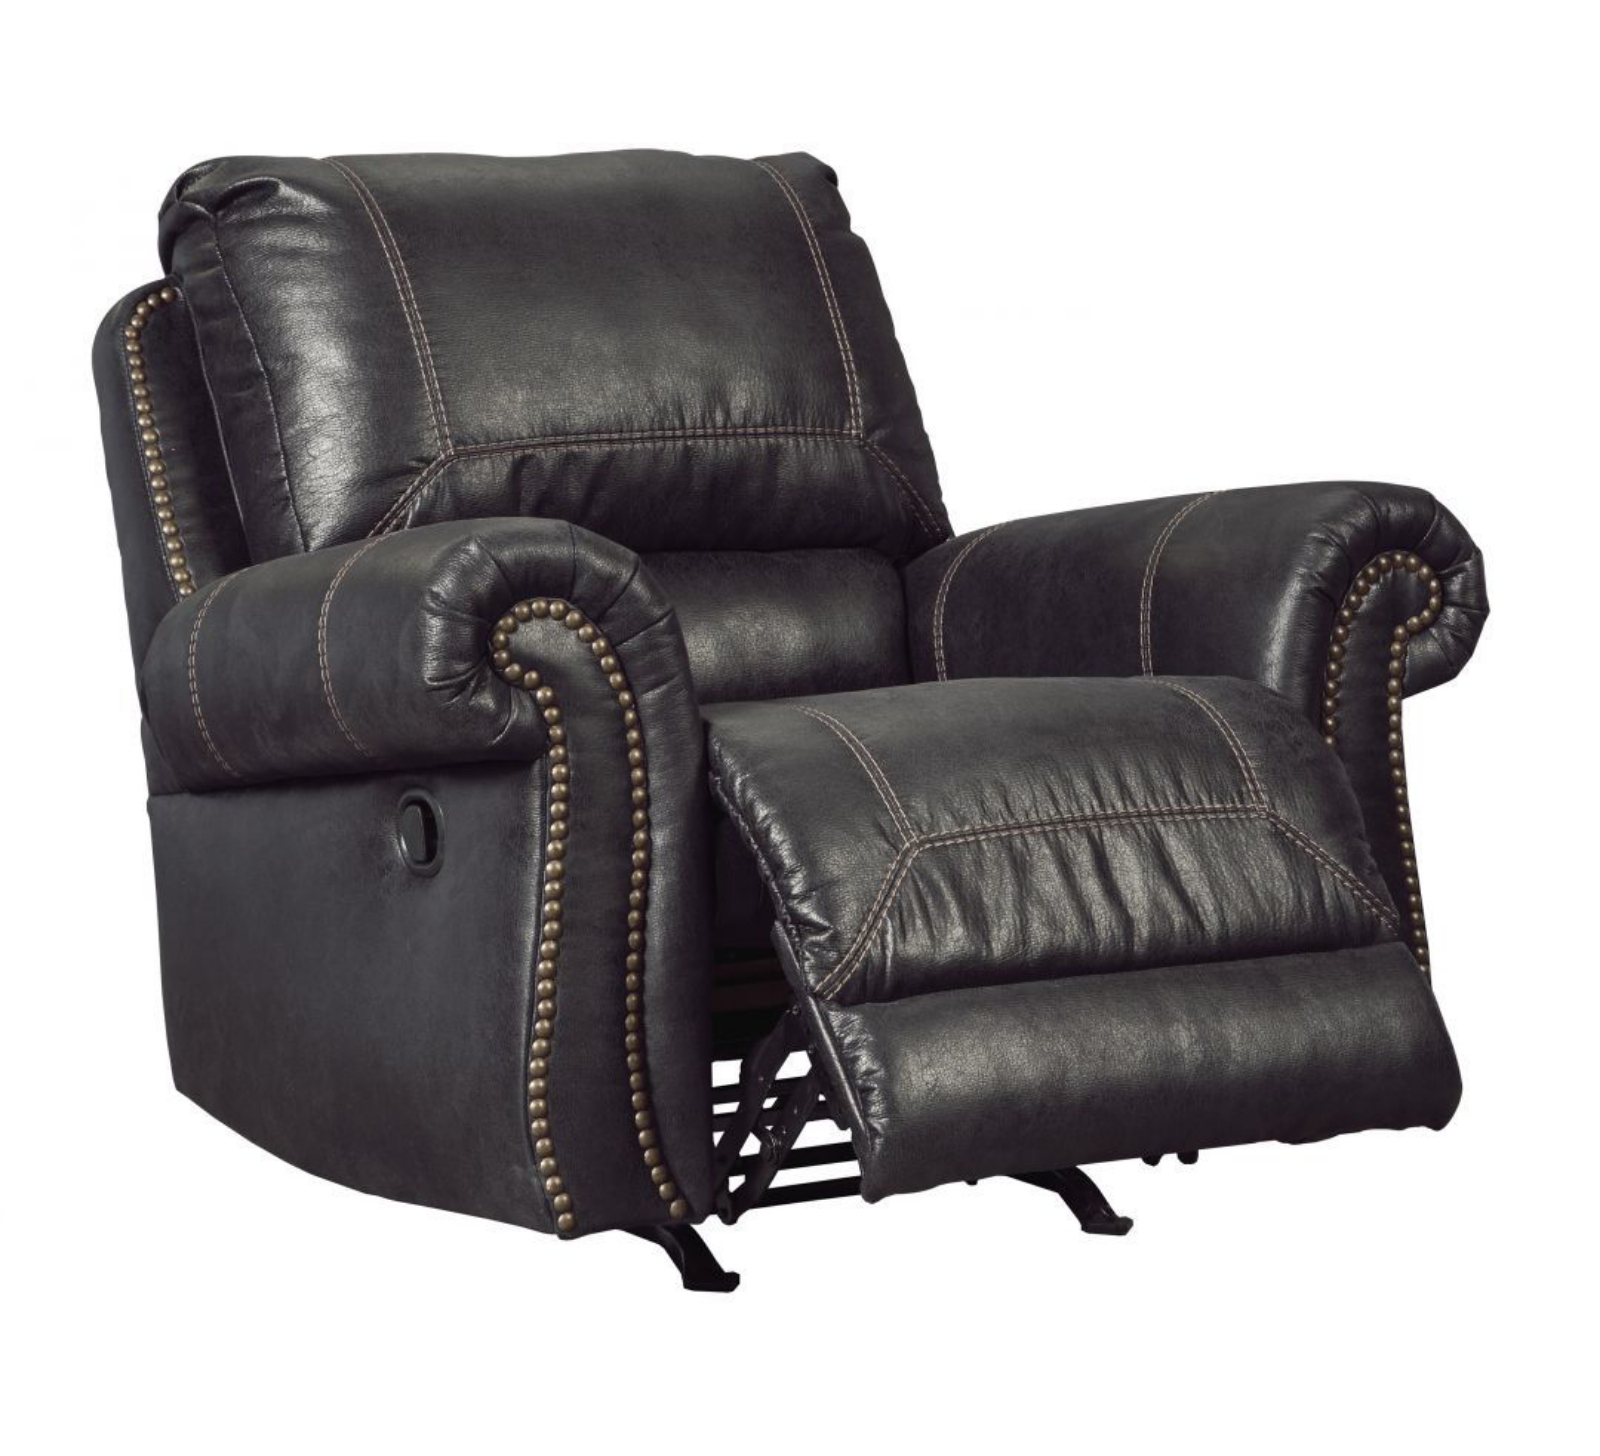 Picture of Milhaven Recliner